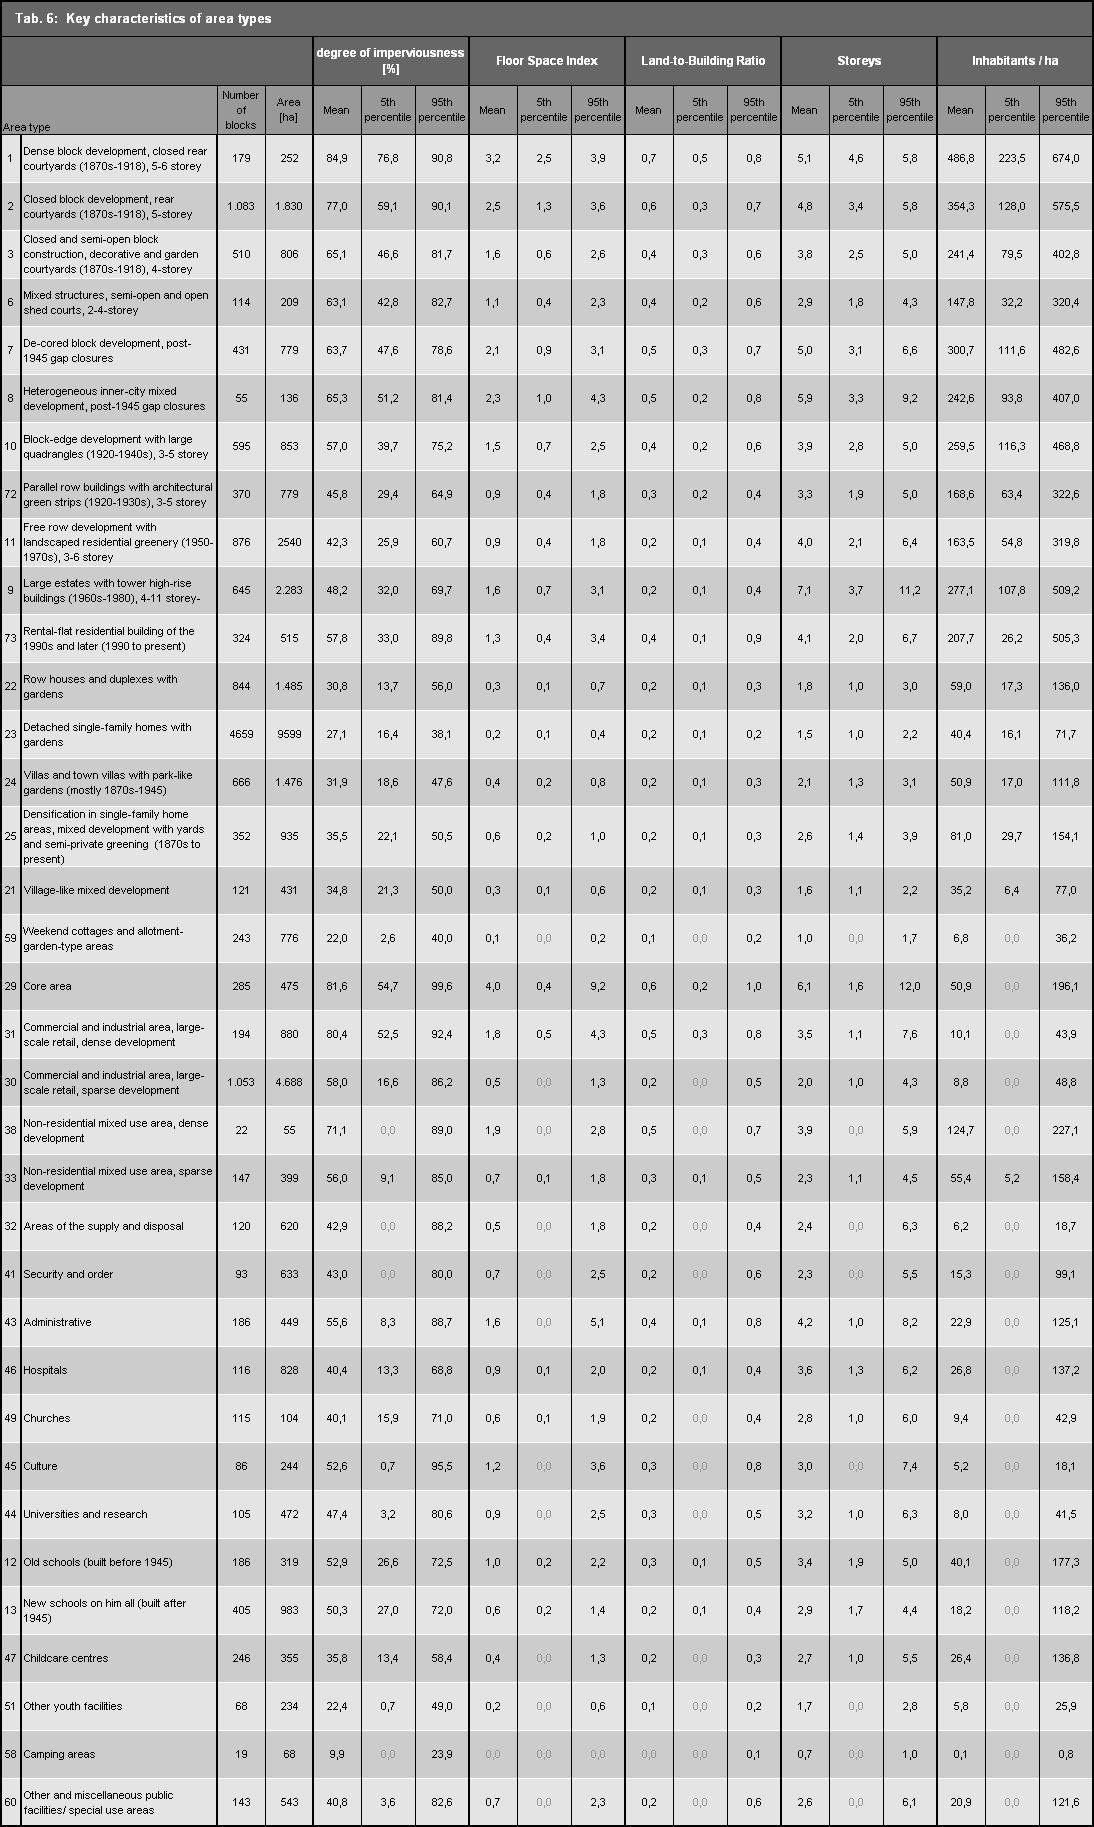 Enlarge photo: Tab. 6: Key characteristics for selected section types, as of: December 31, 2010